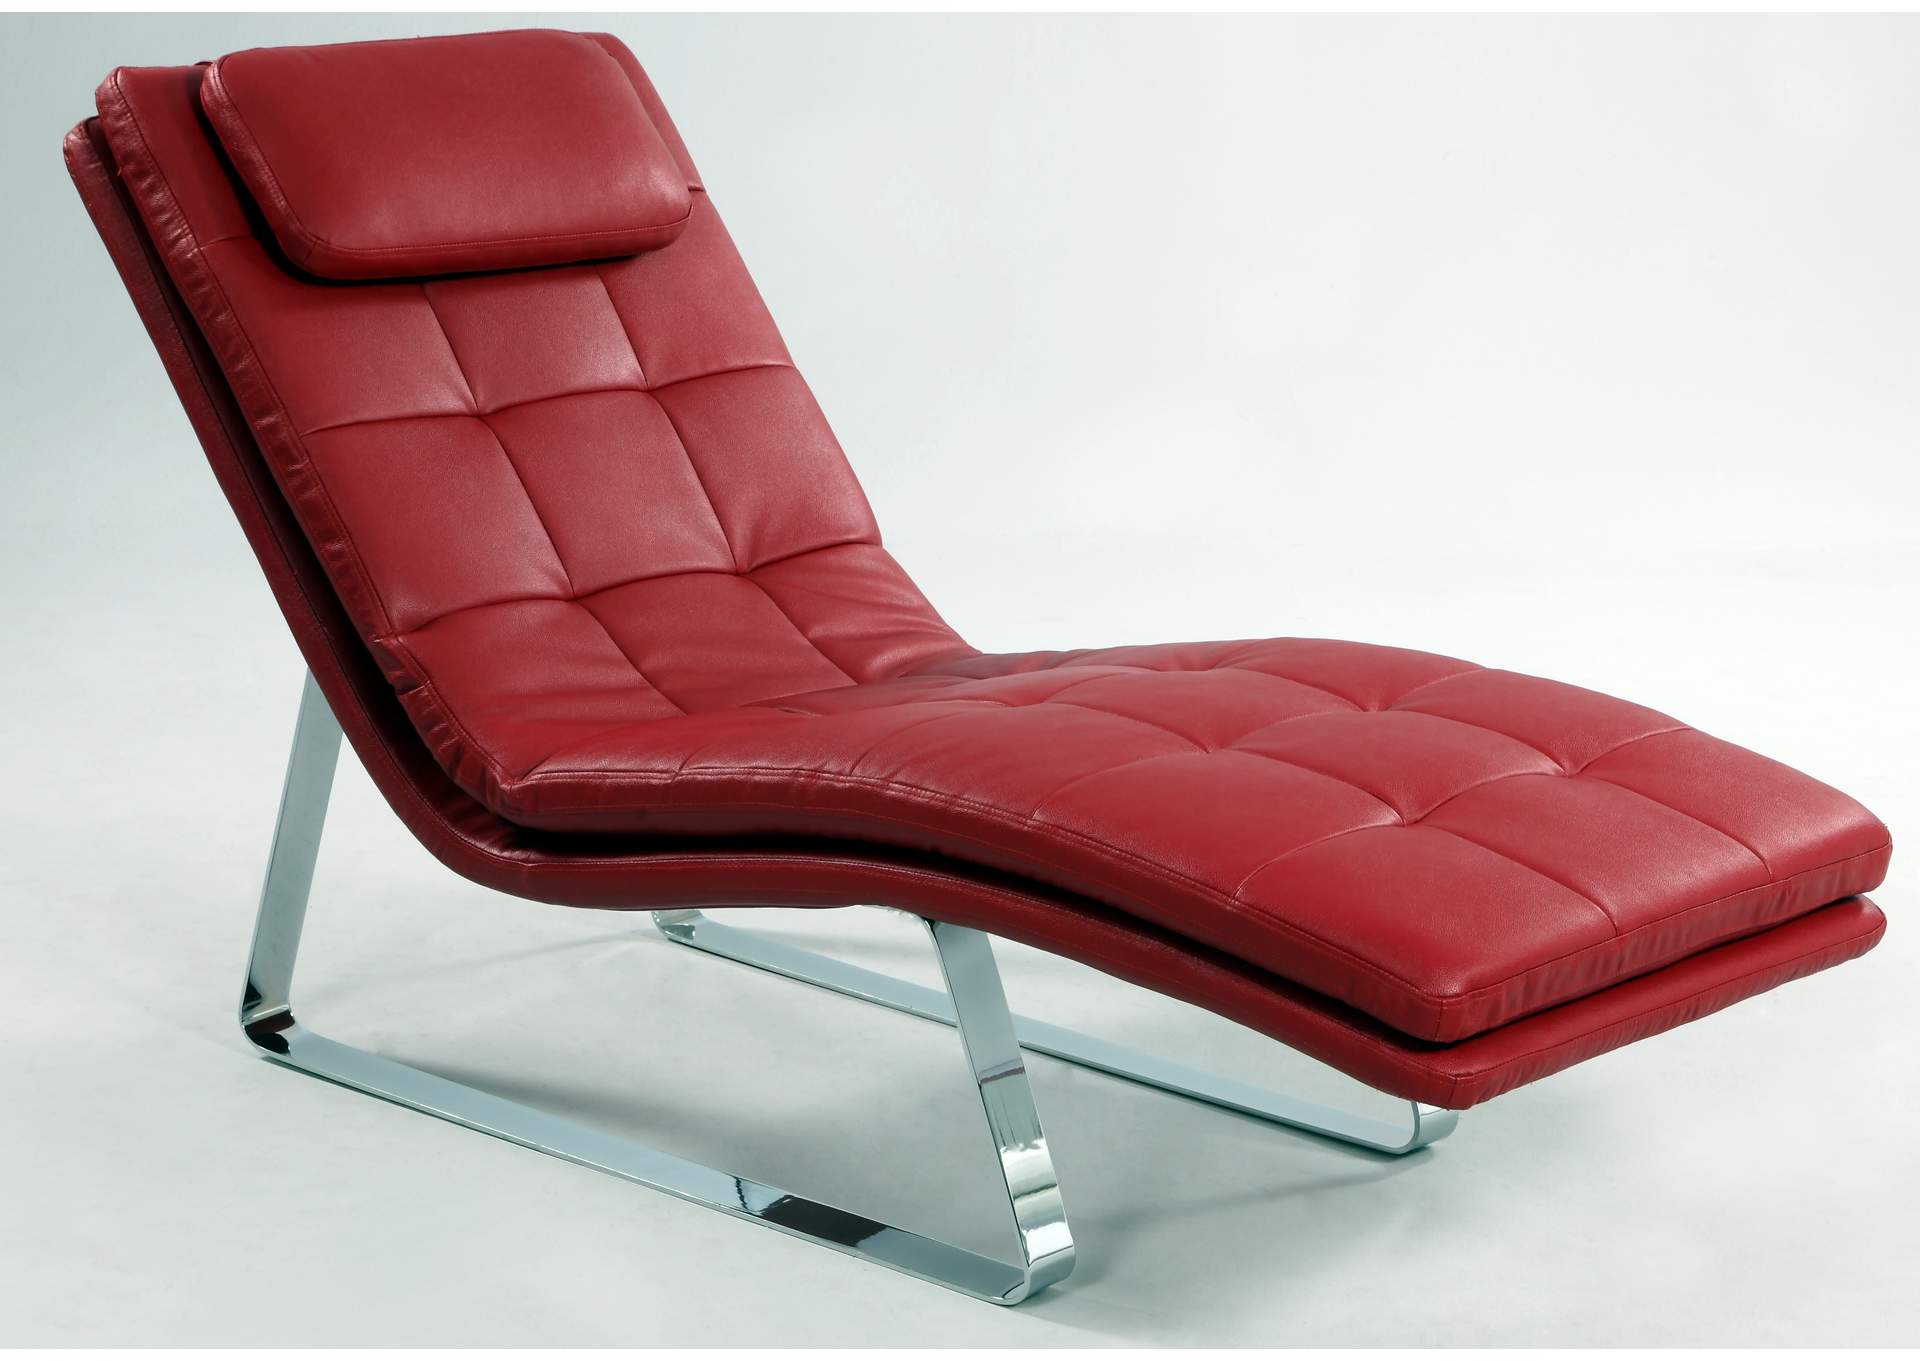 Corvette Contemporary Lounge Chair w/ Chrome Legs,Chintaly Imports